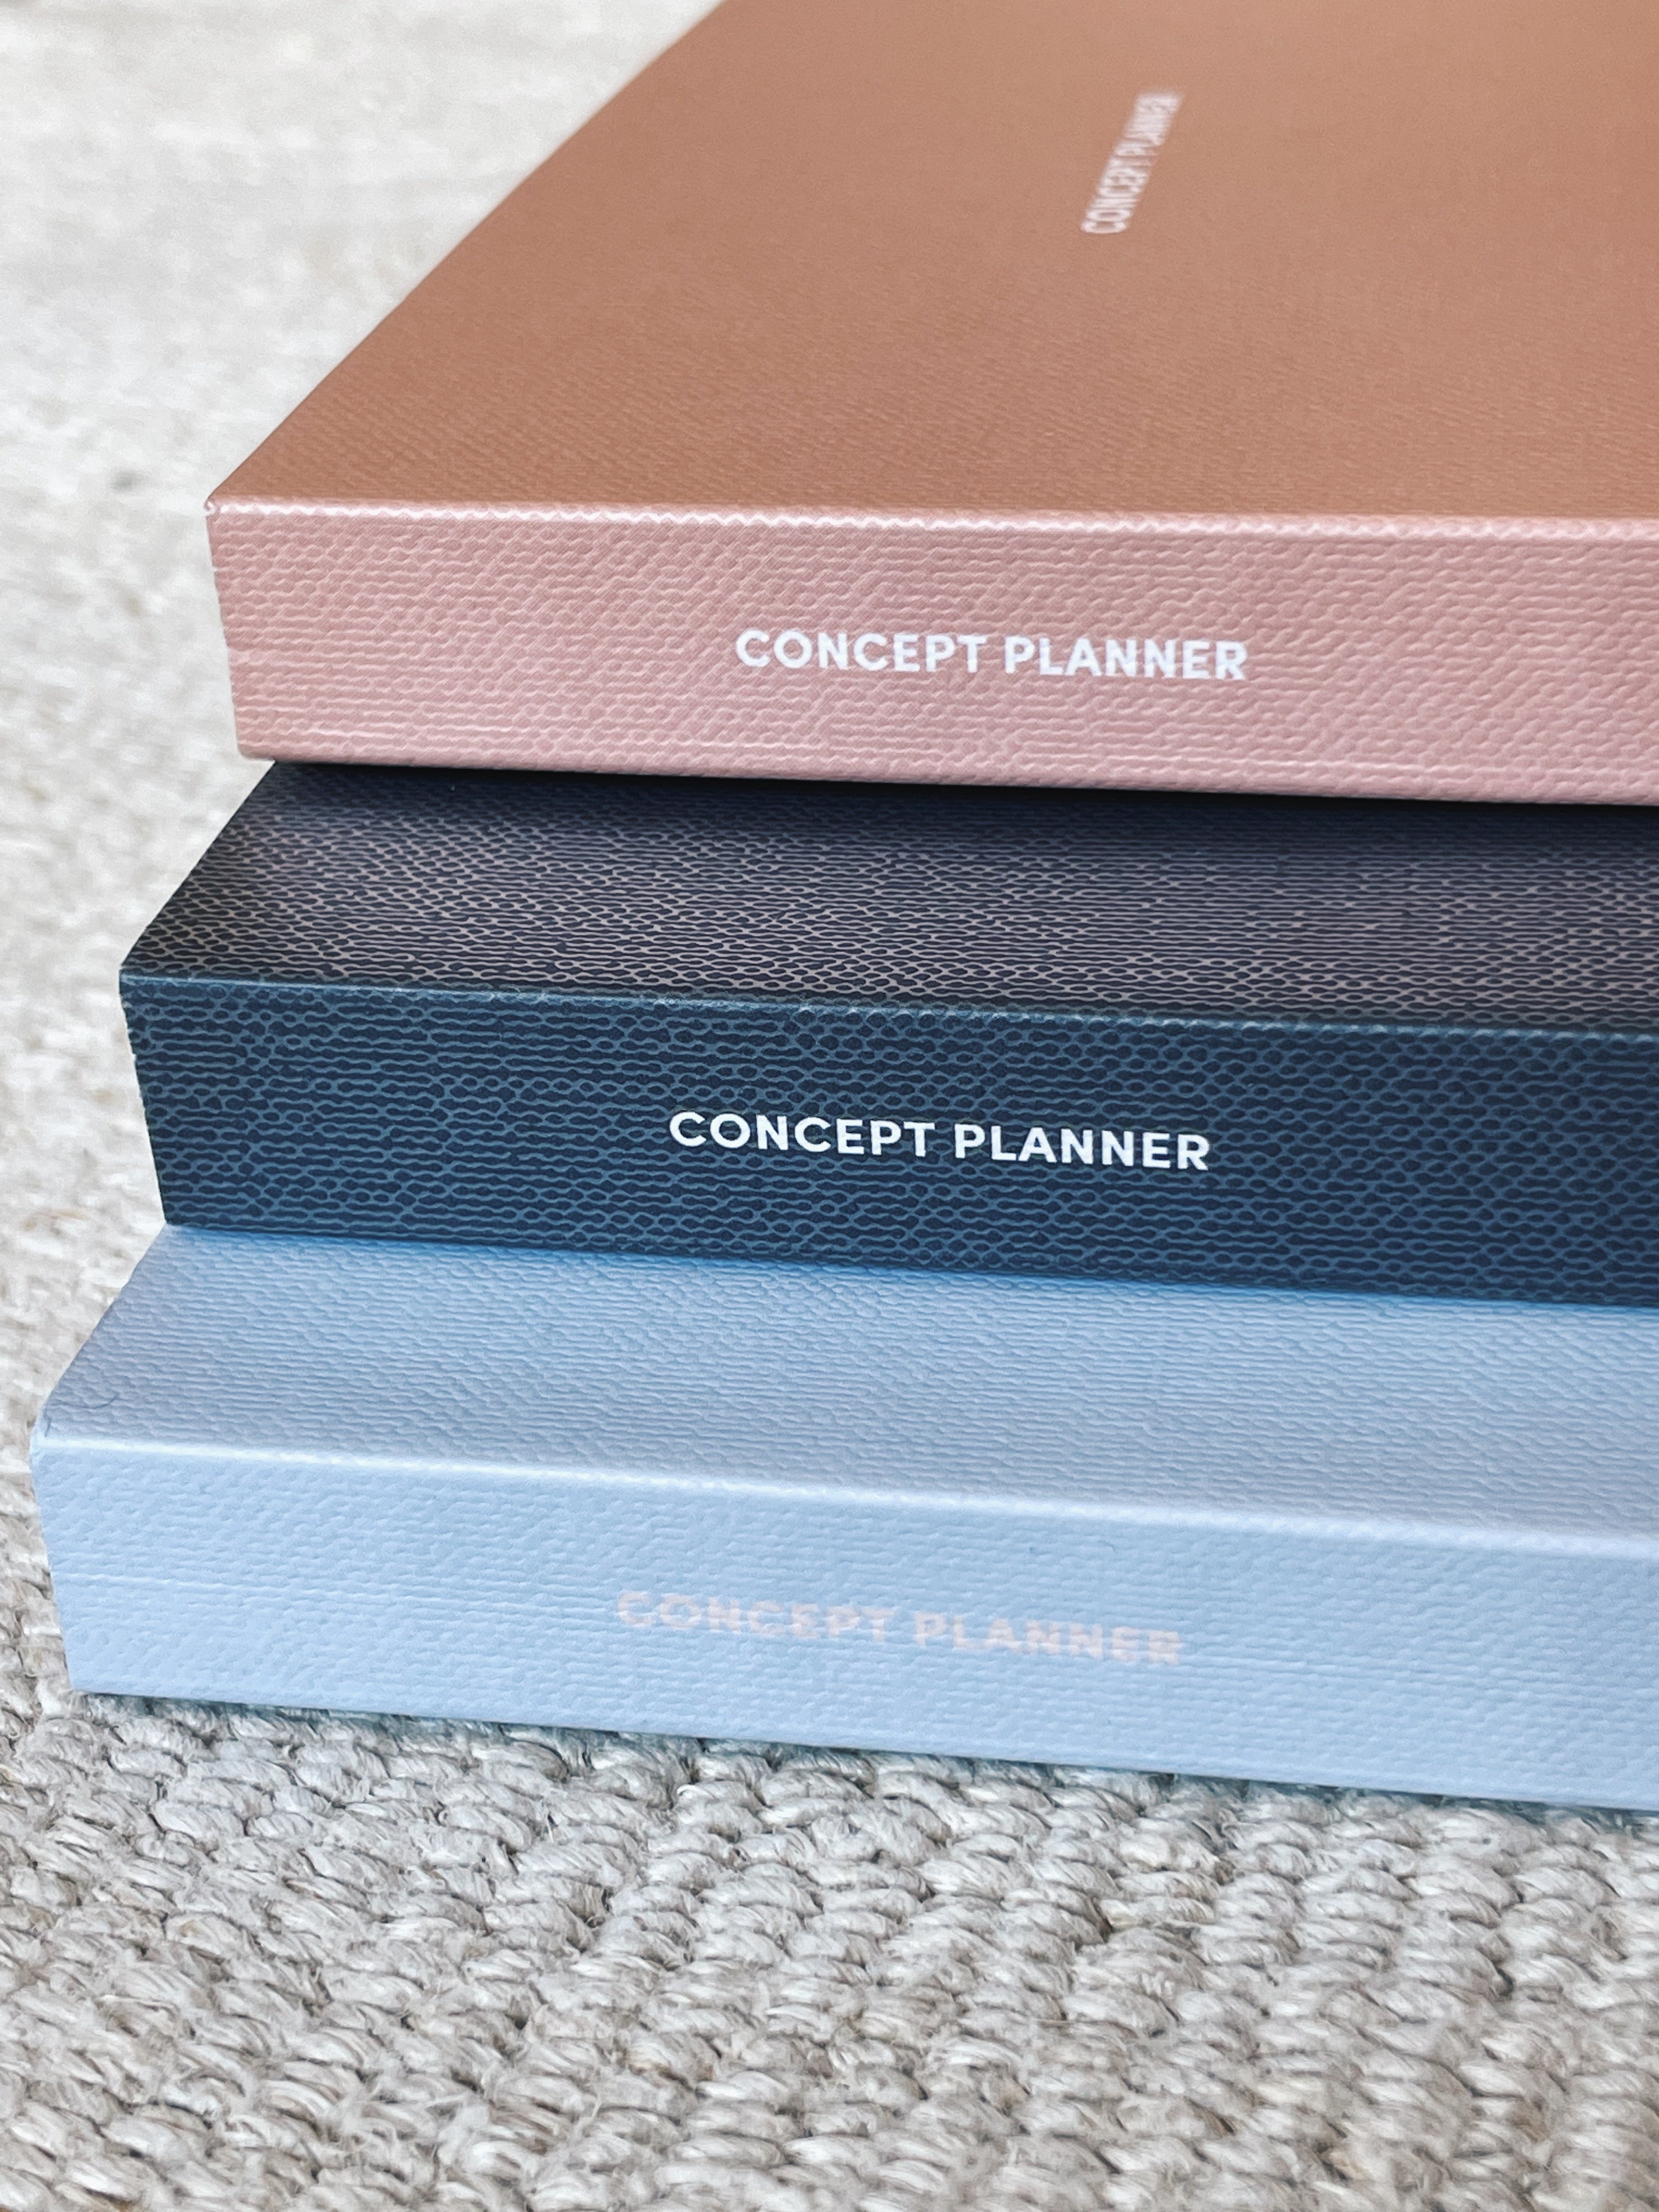 Concept Planner in Clay